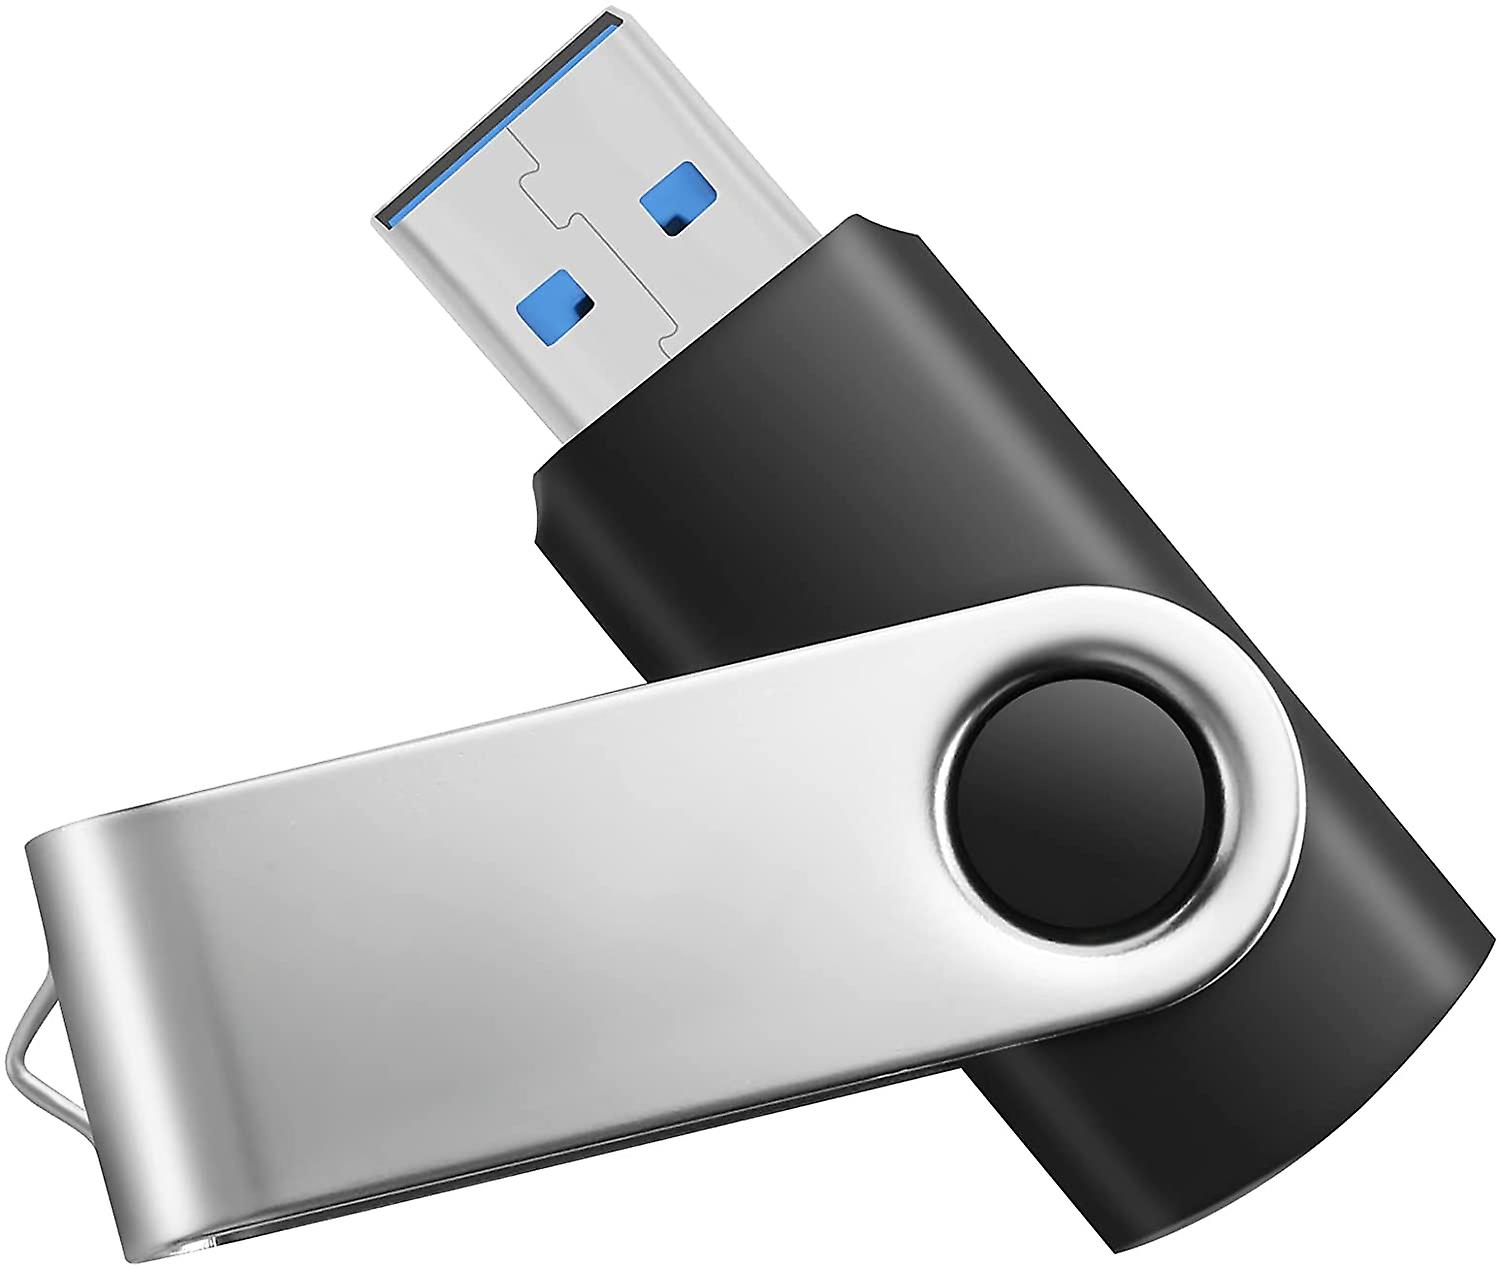 What Is a Flash Drive?